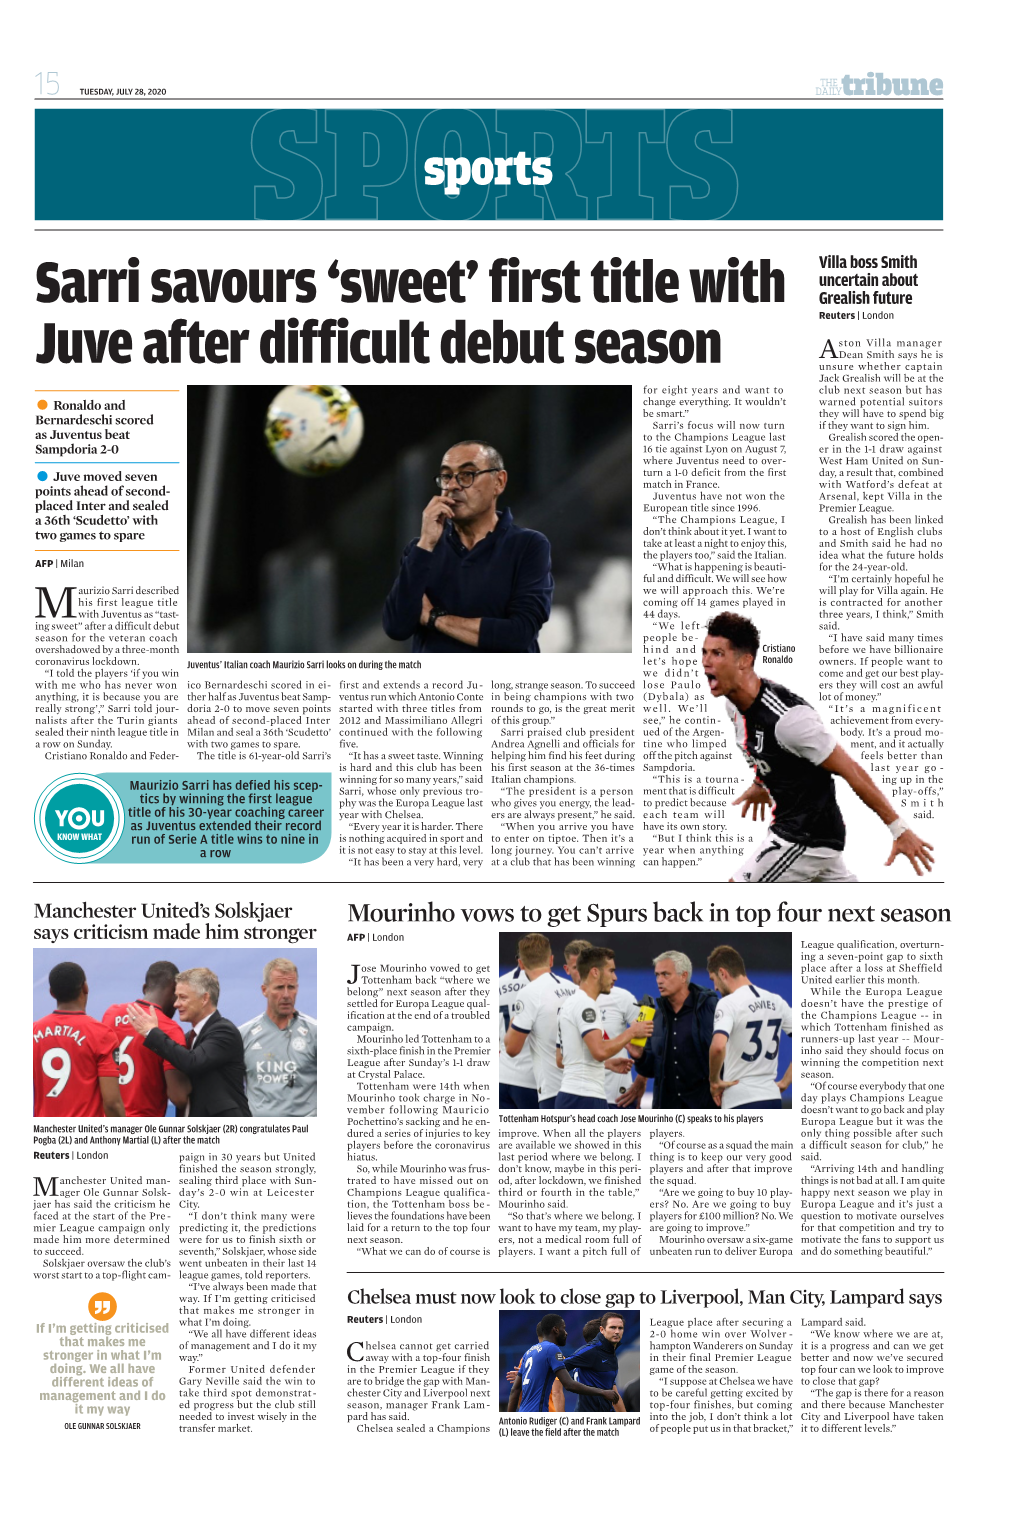 Sarri Savours 'Sweet' First Title with Juve After Difficult Debut Season